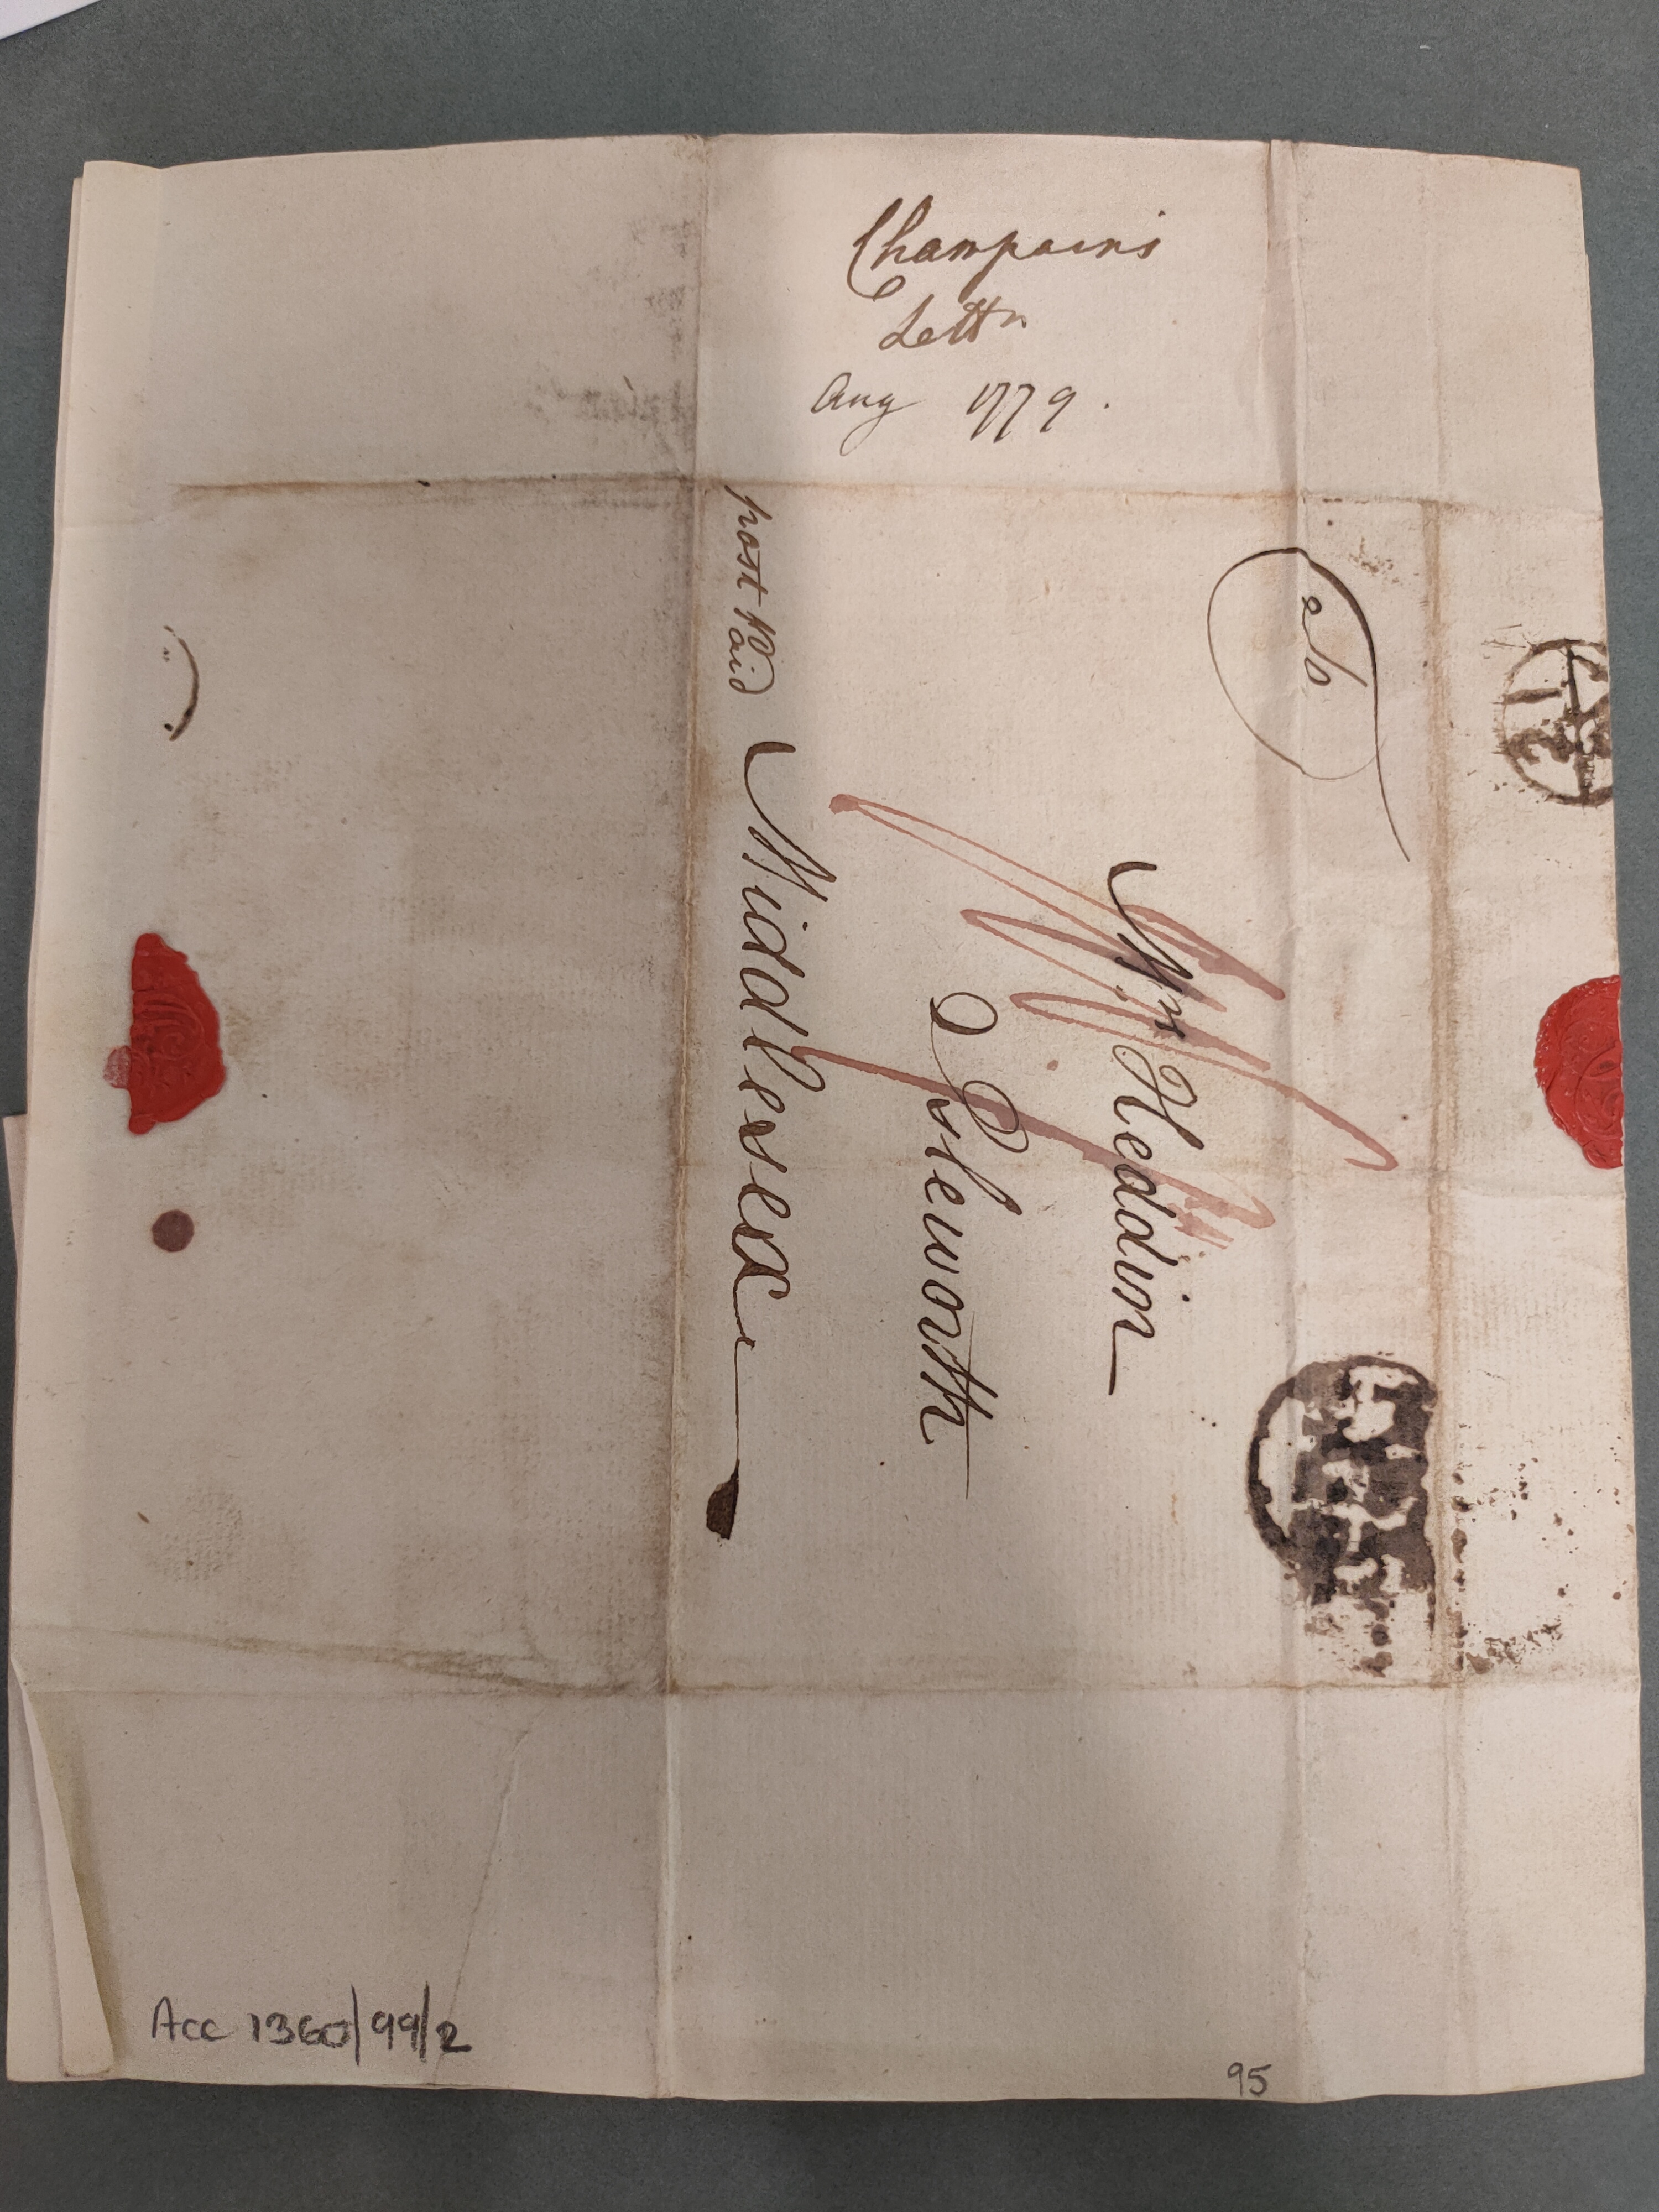 Image #2 of letter: James Champain to Martha Heddin, 21 August 1779